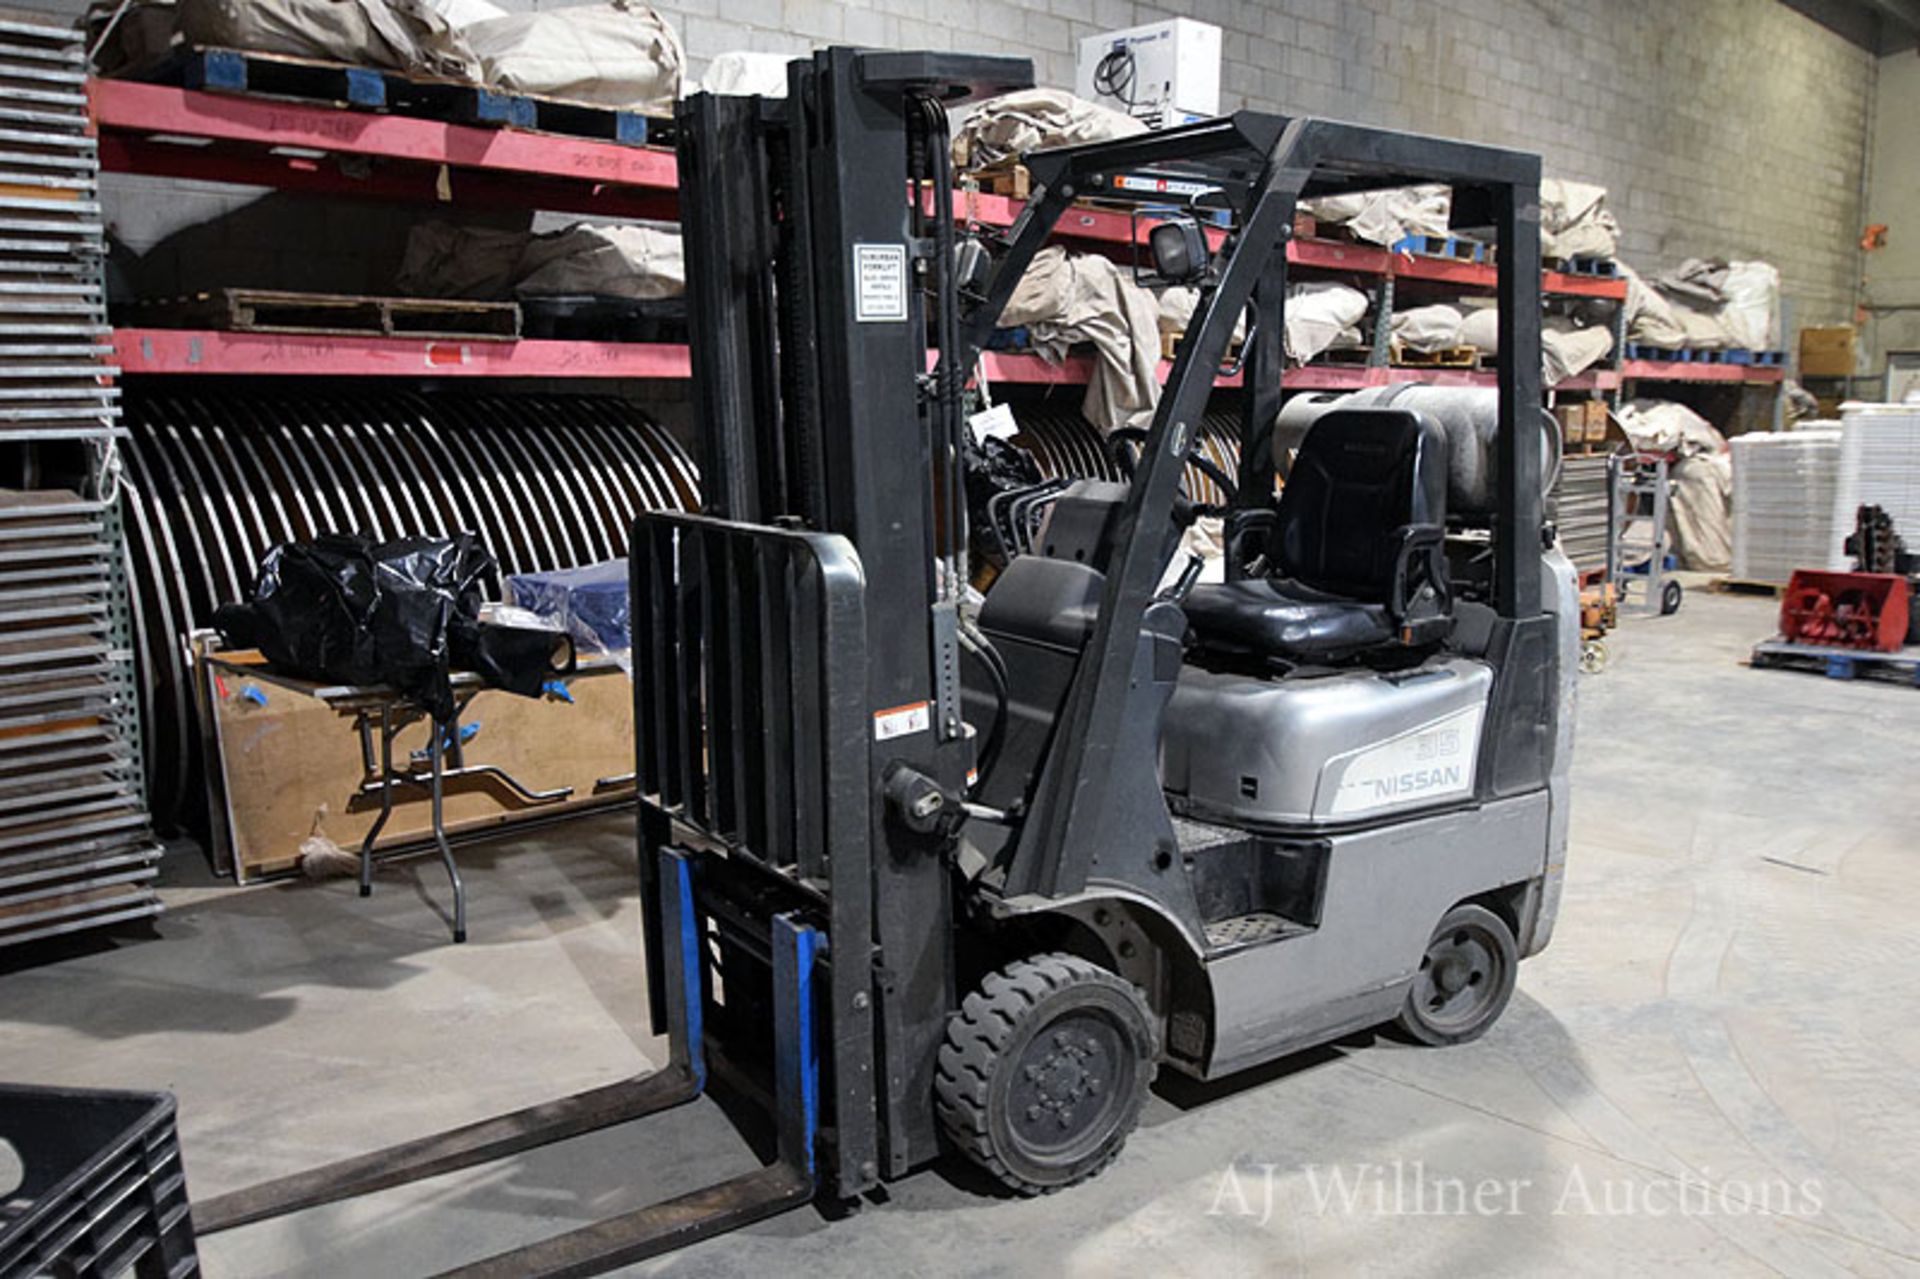 Nissan Model MCP1F1A18LV 3,000lbs Capacity LPG Forklift w/Side Shift & 188" Lift Height 6,272